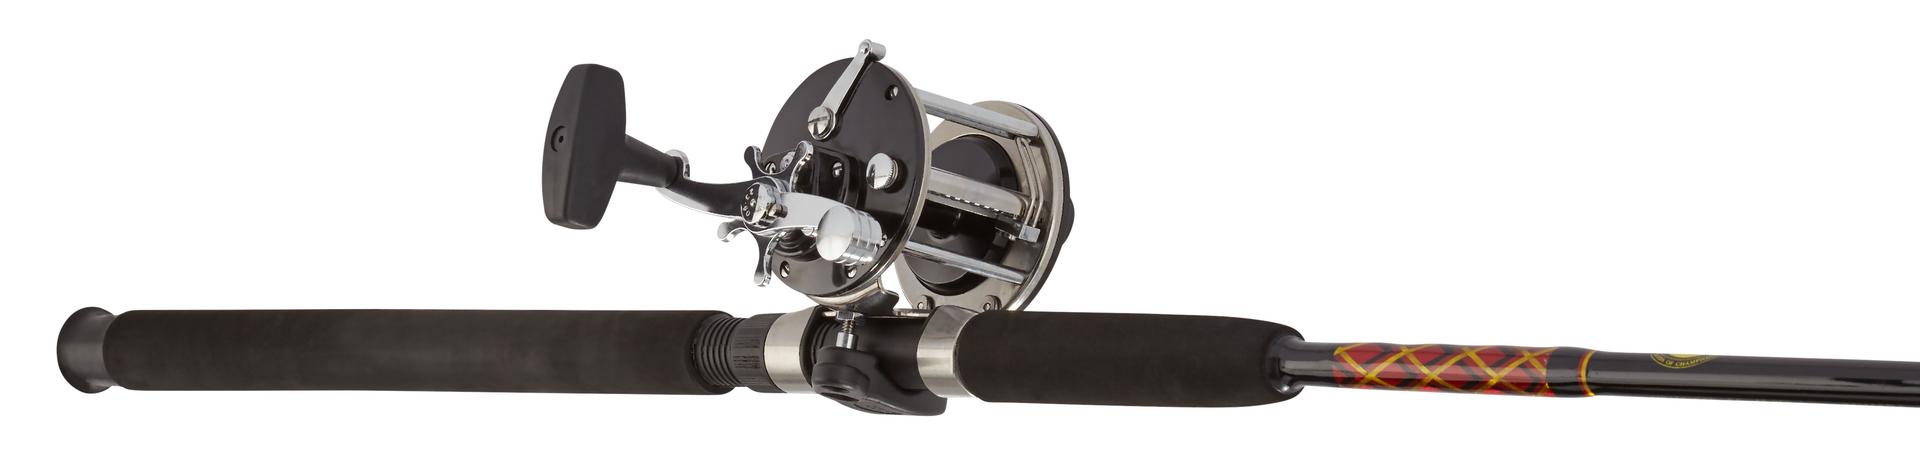 General Purpose Conventional Rod & Reel Combo